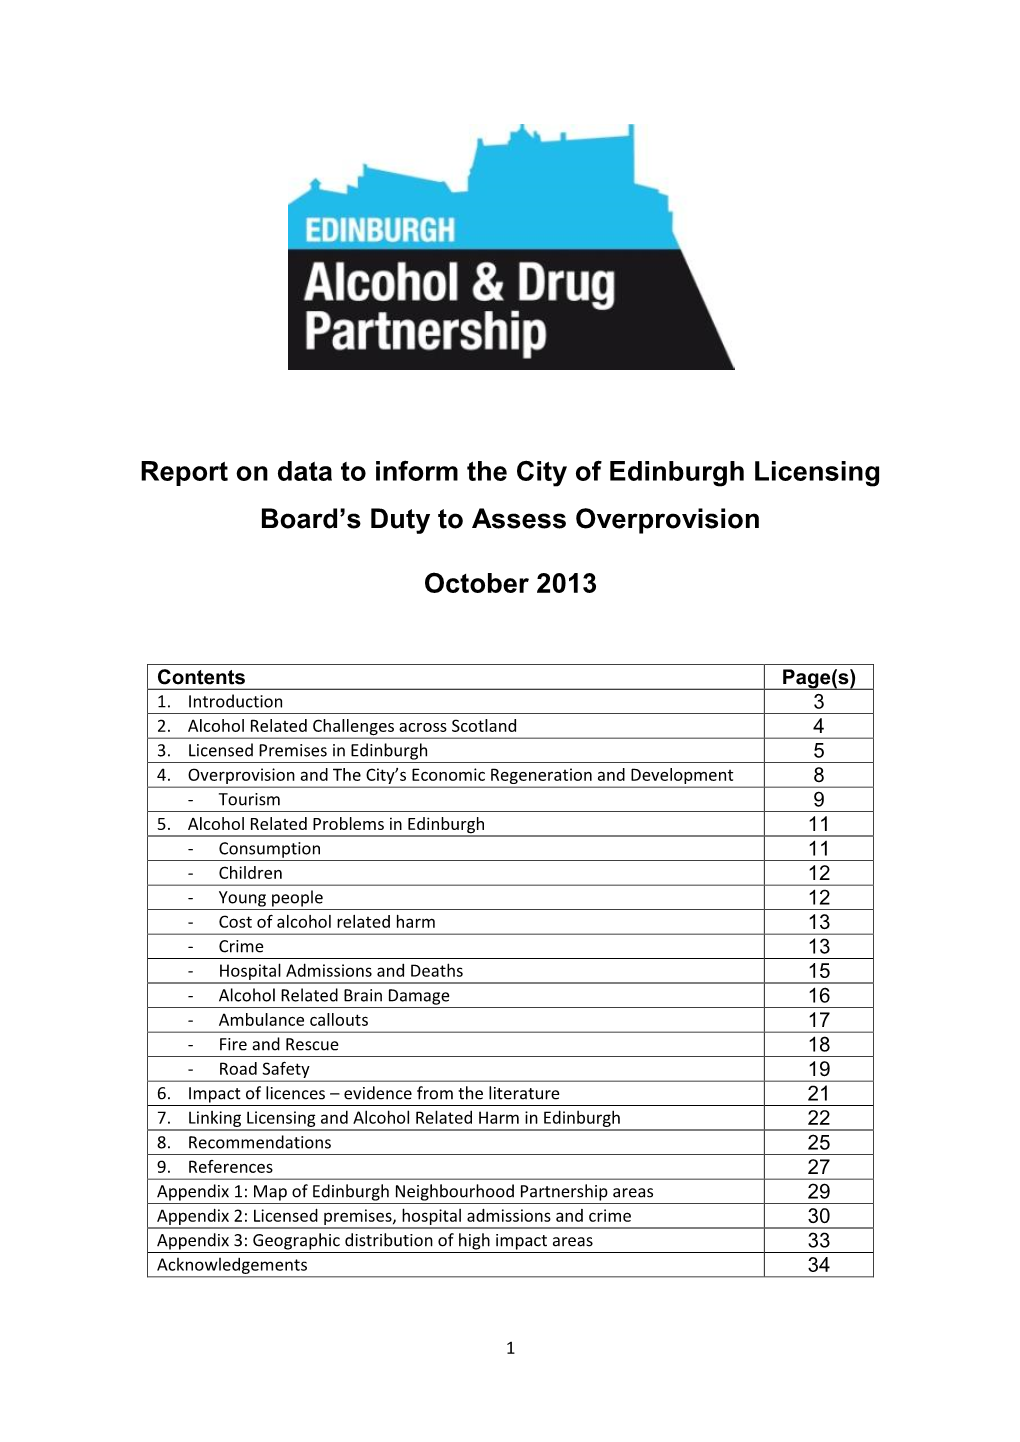 Report on Data to Inform the City of Edinburgh Licensing Board's Duty